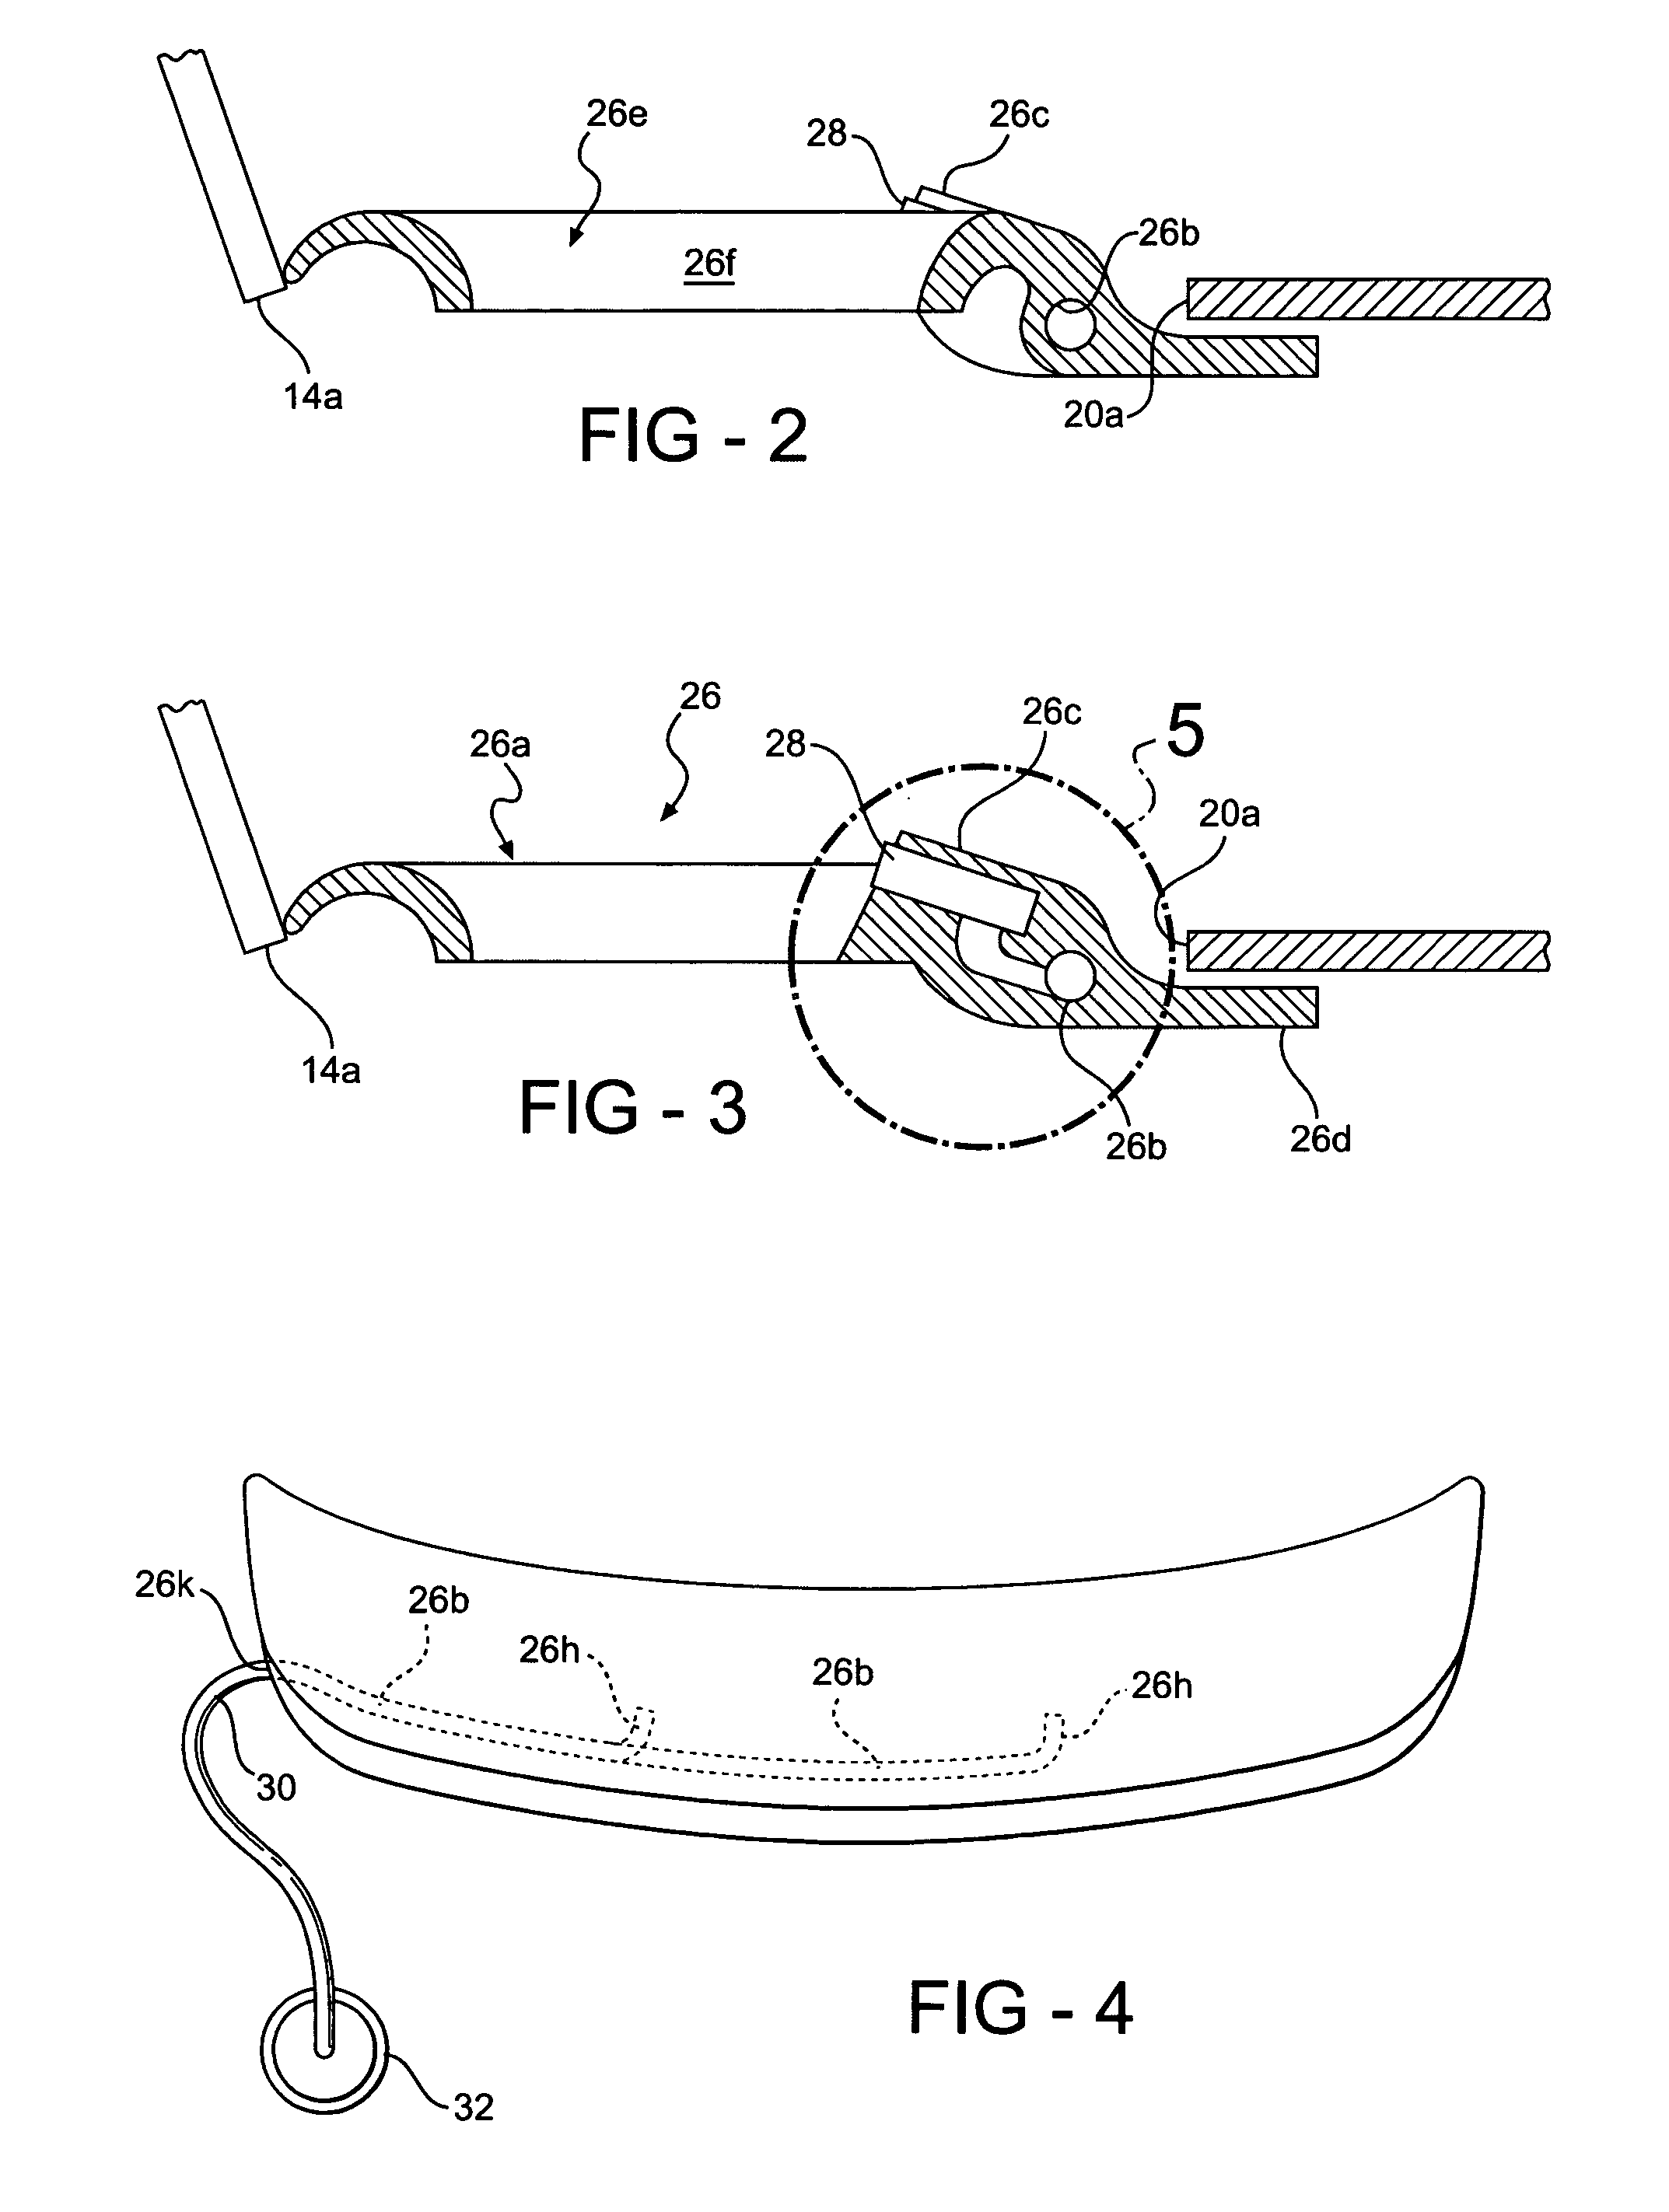 Cowl grille structure with integral washer fluid channel